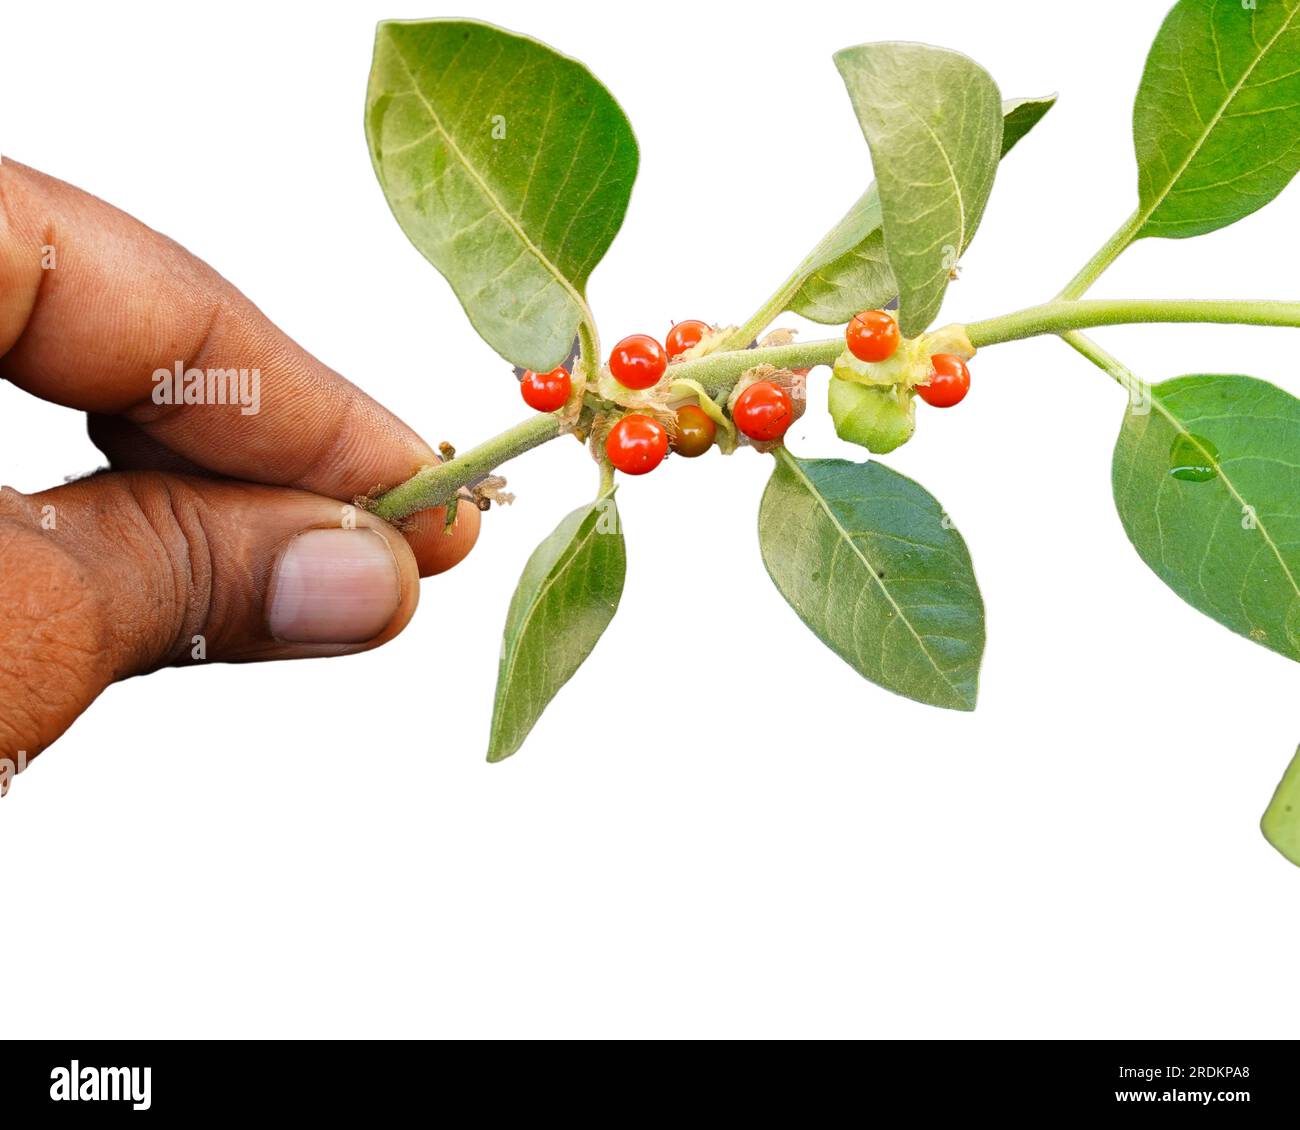 man holding ashwagandha or withania somnifera branch with green and red fruits. Stock Photo